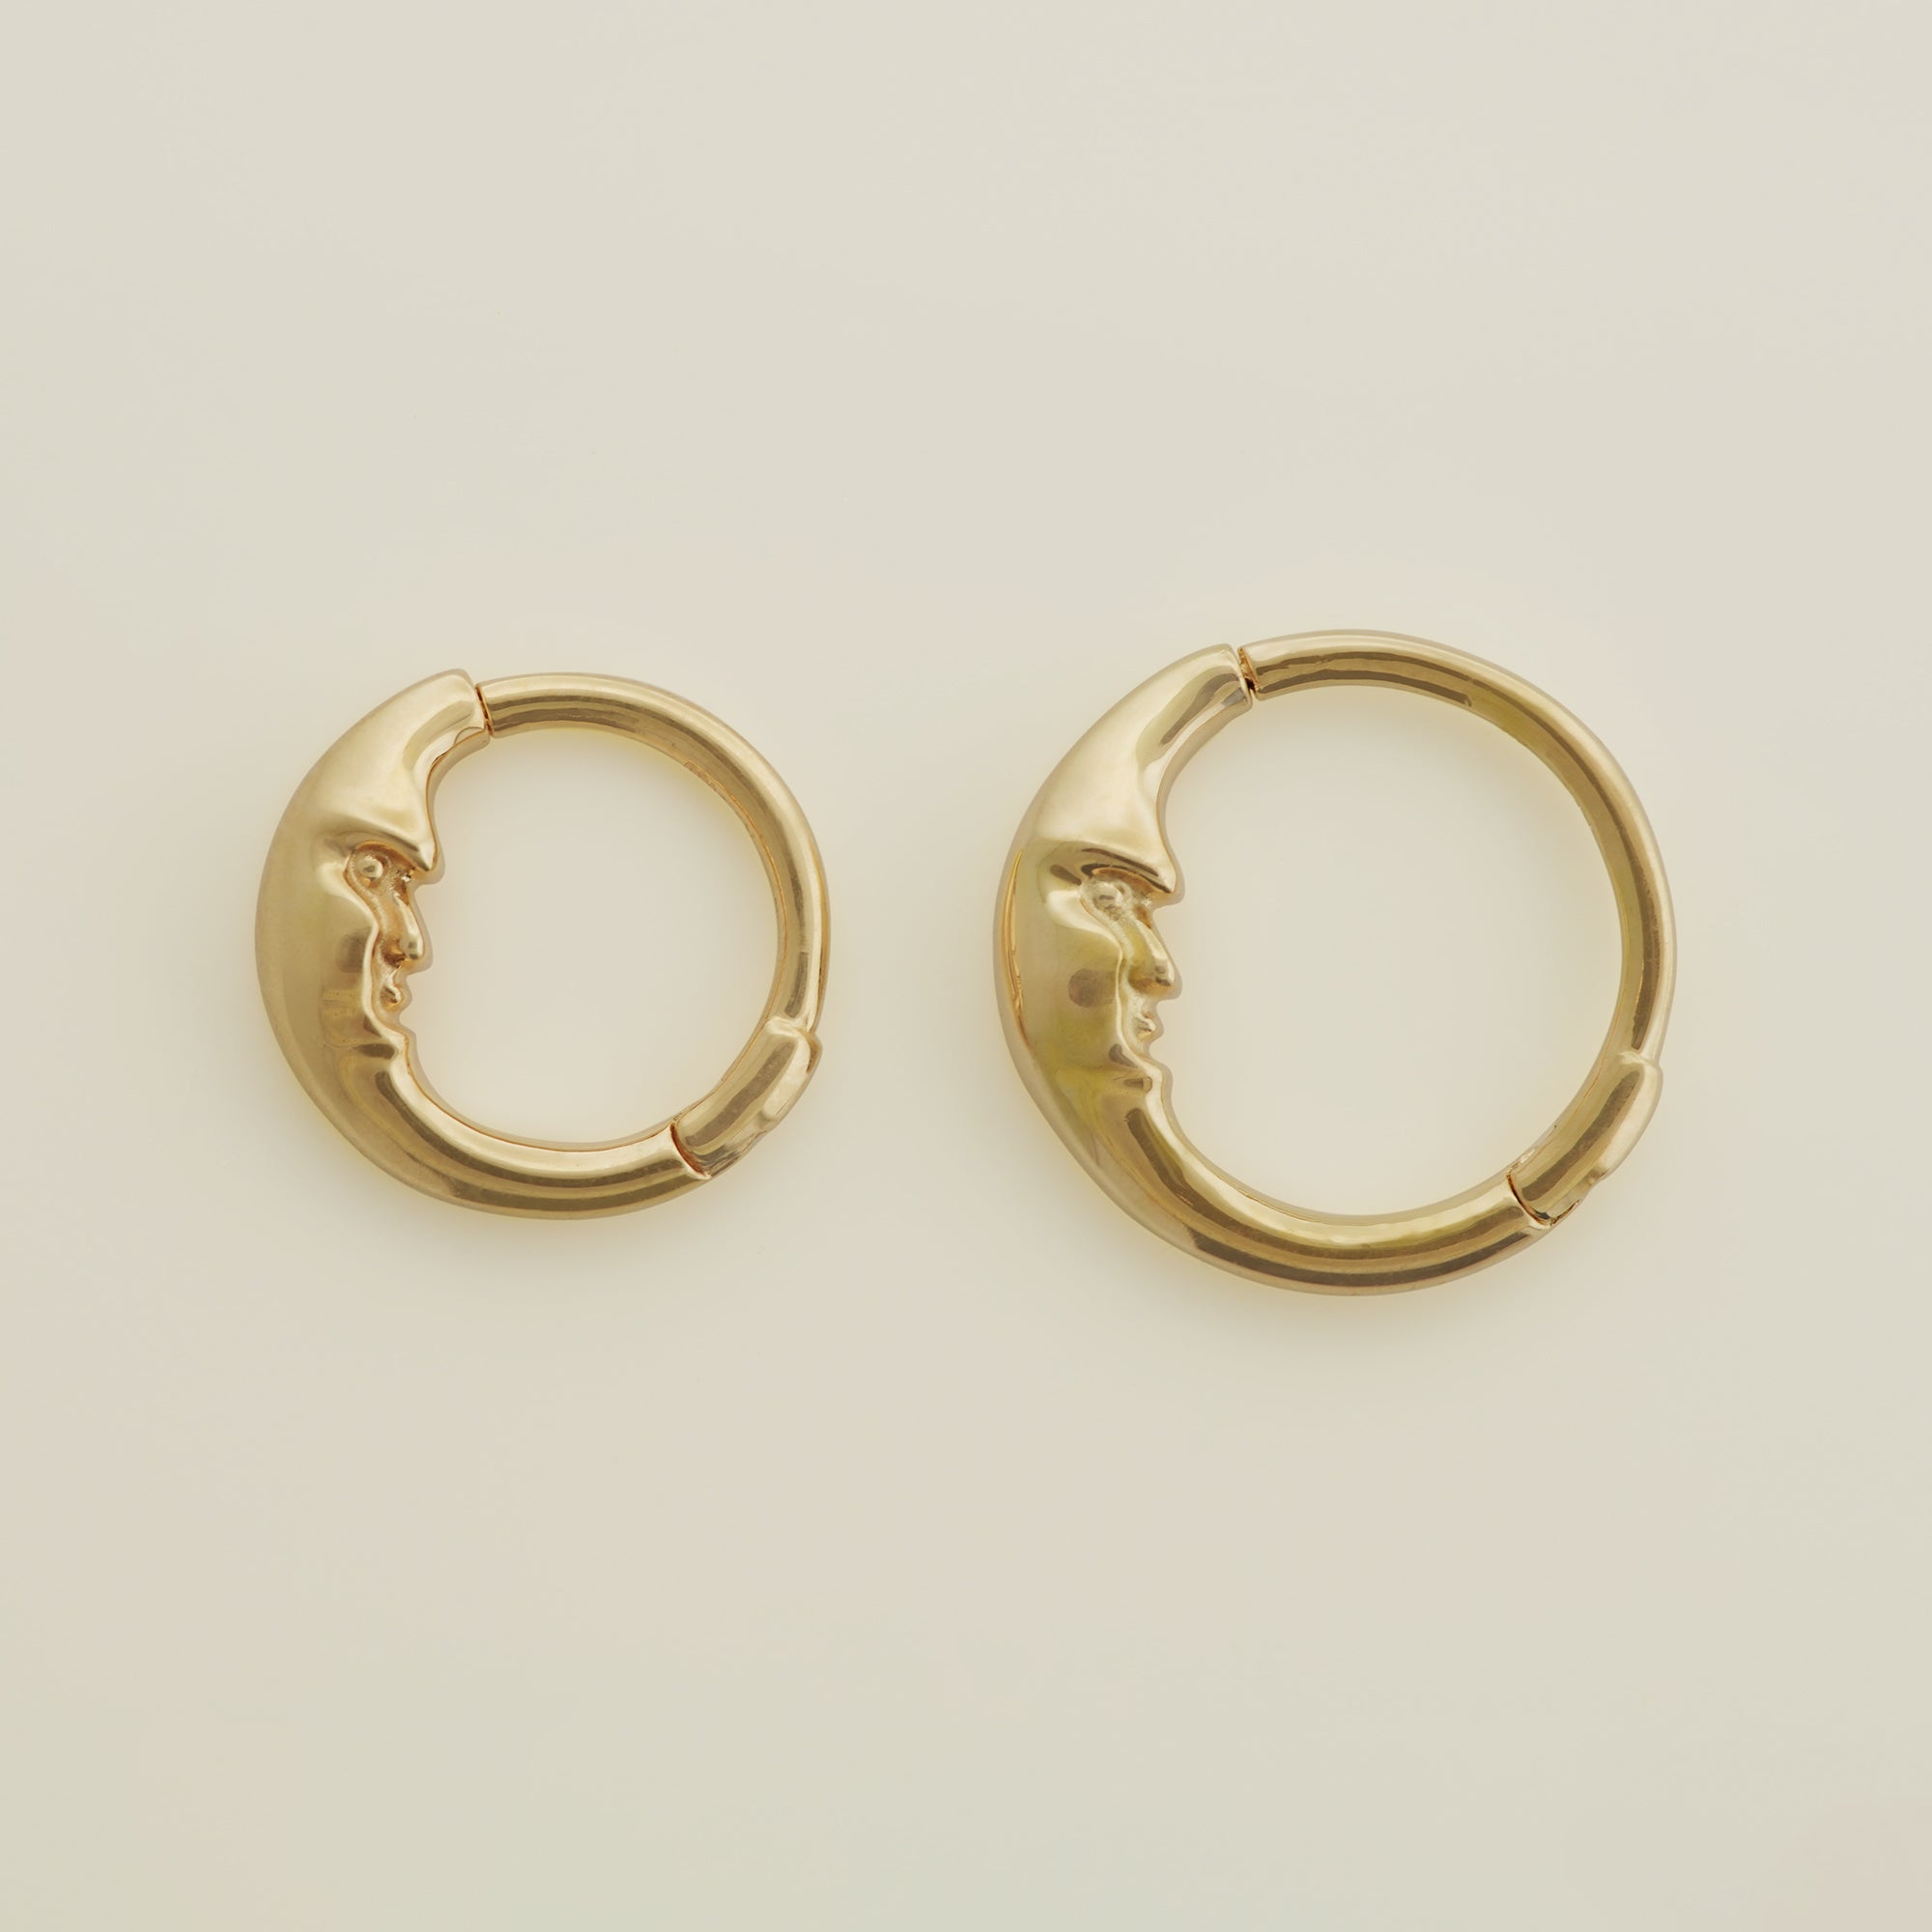 14K Solid Gold Crescent Moon Face Hoop Piercing Earring (Daith & Septum) - Anygolds 